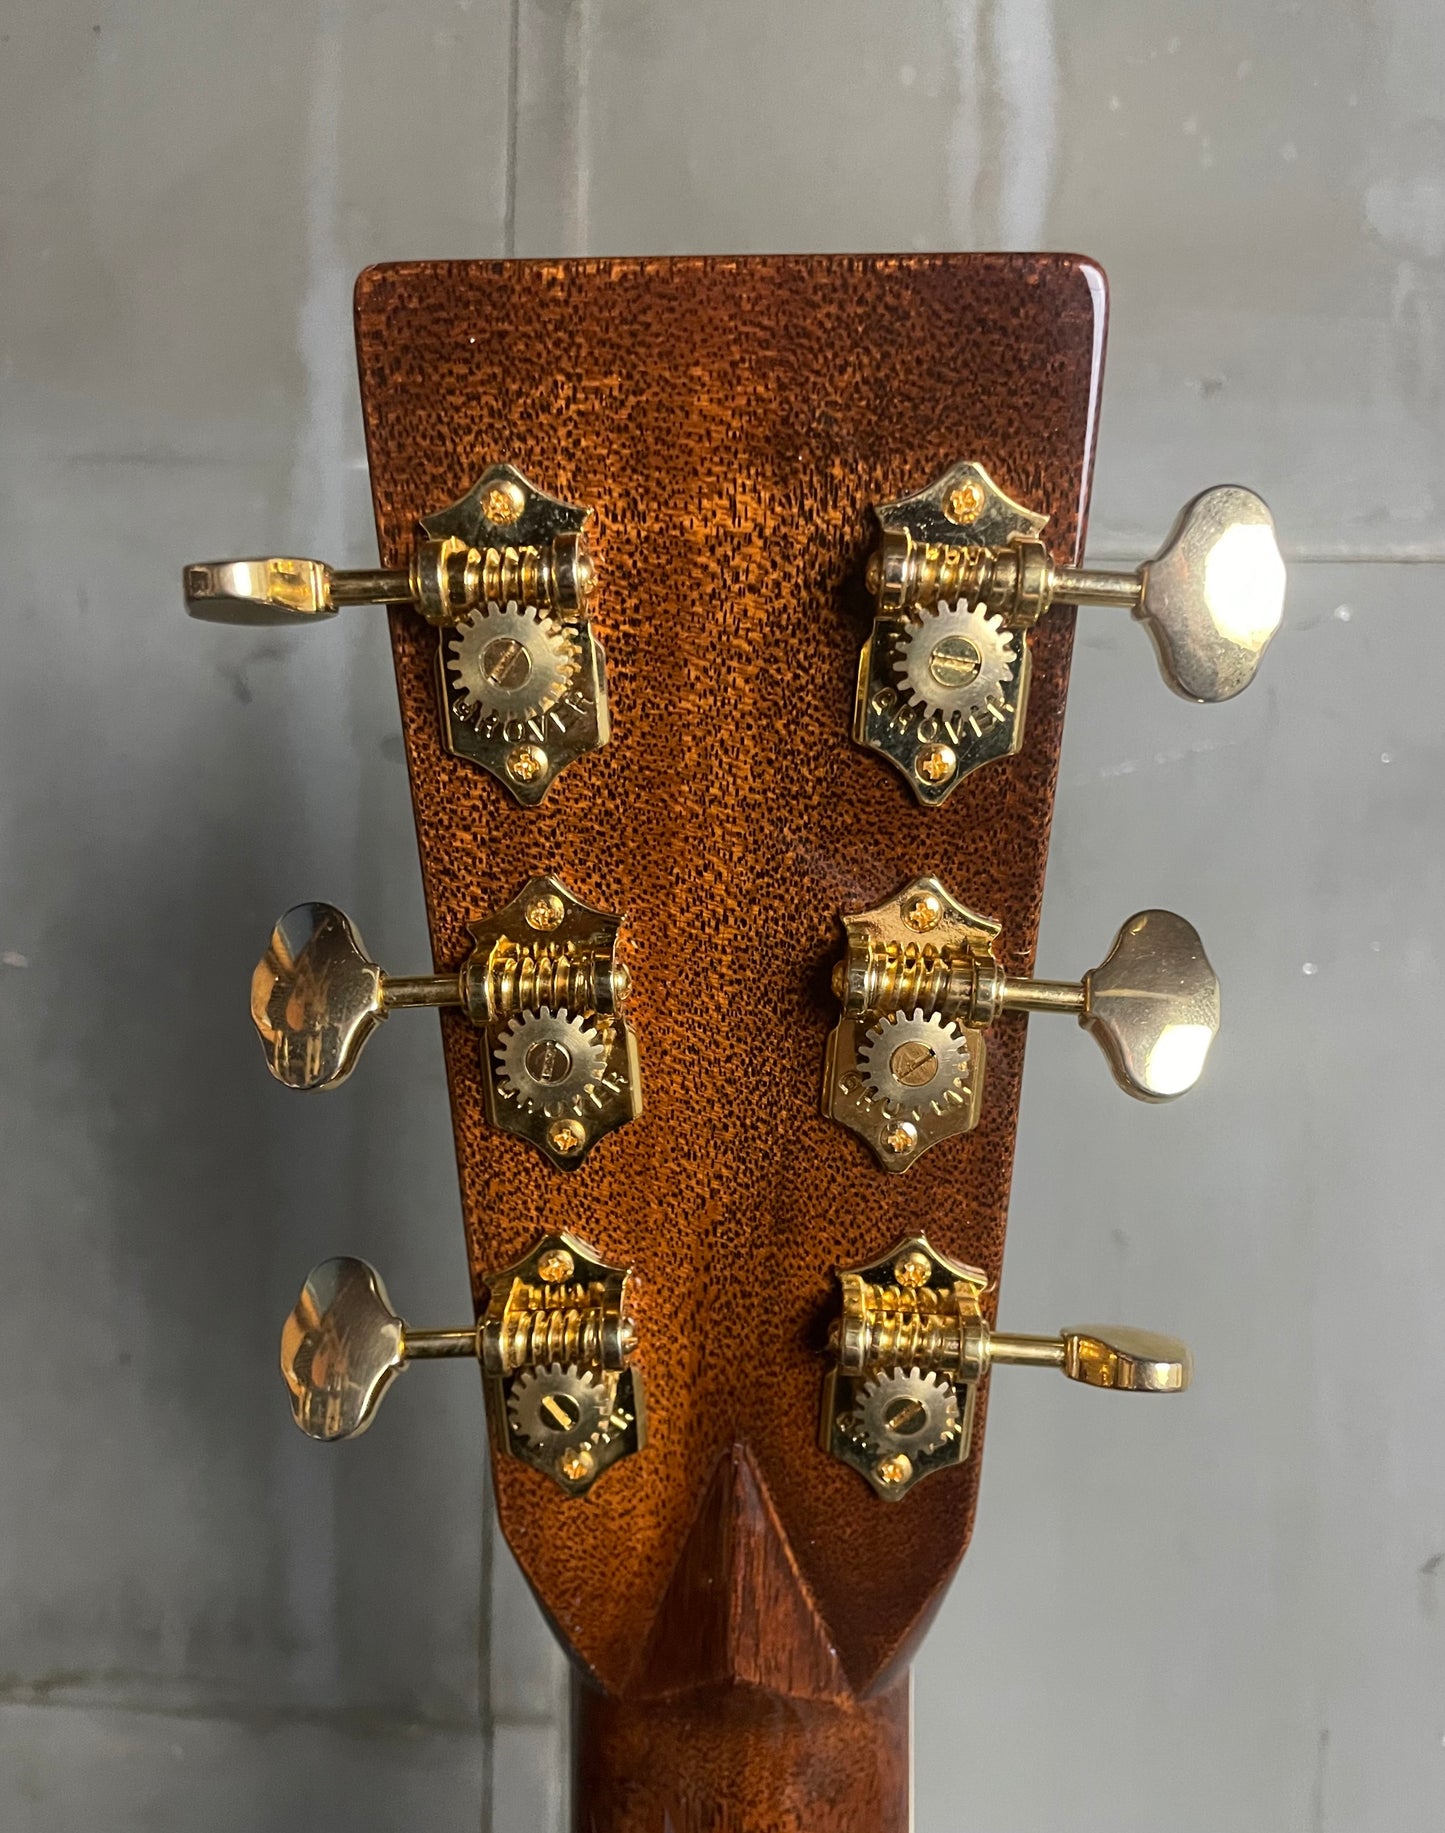 2020 Martin D-45 (USED)